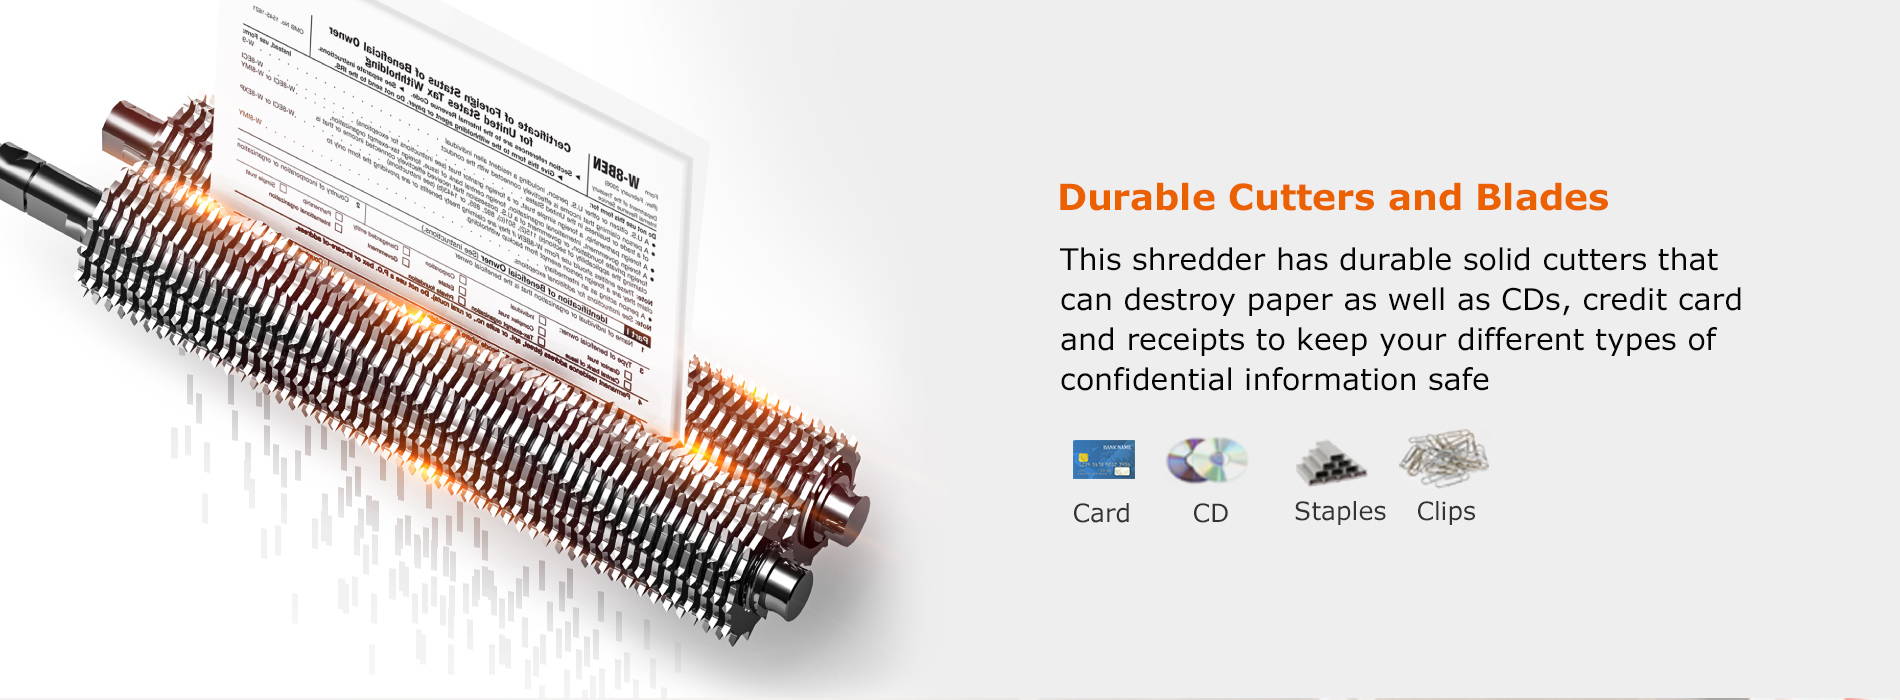 Durable Cutters and Blades  This shredder has durable solid cutters that can destroy paper as well as CDs, credit card and receipts to keep your different types of confidential information safe